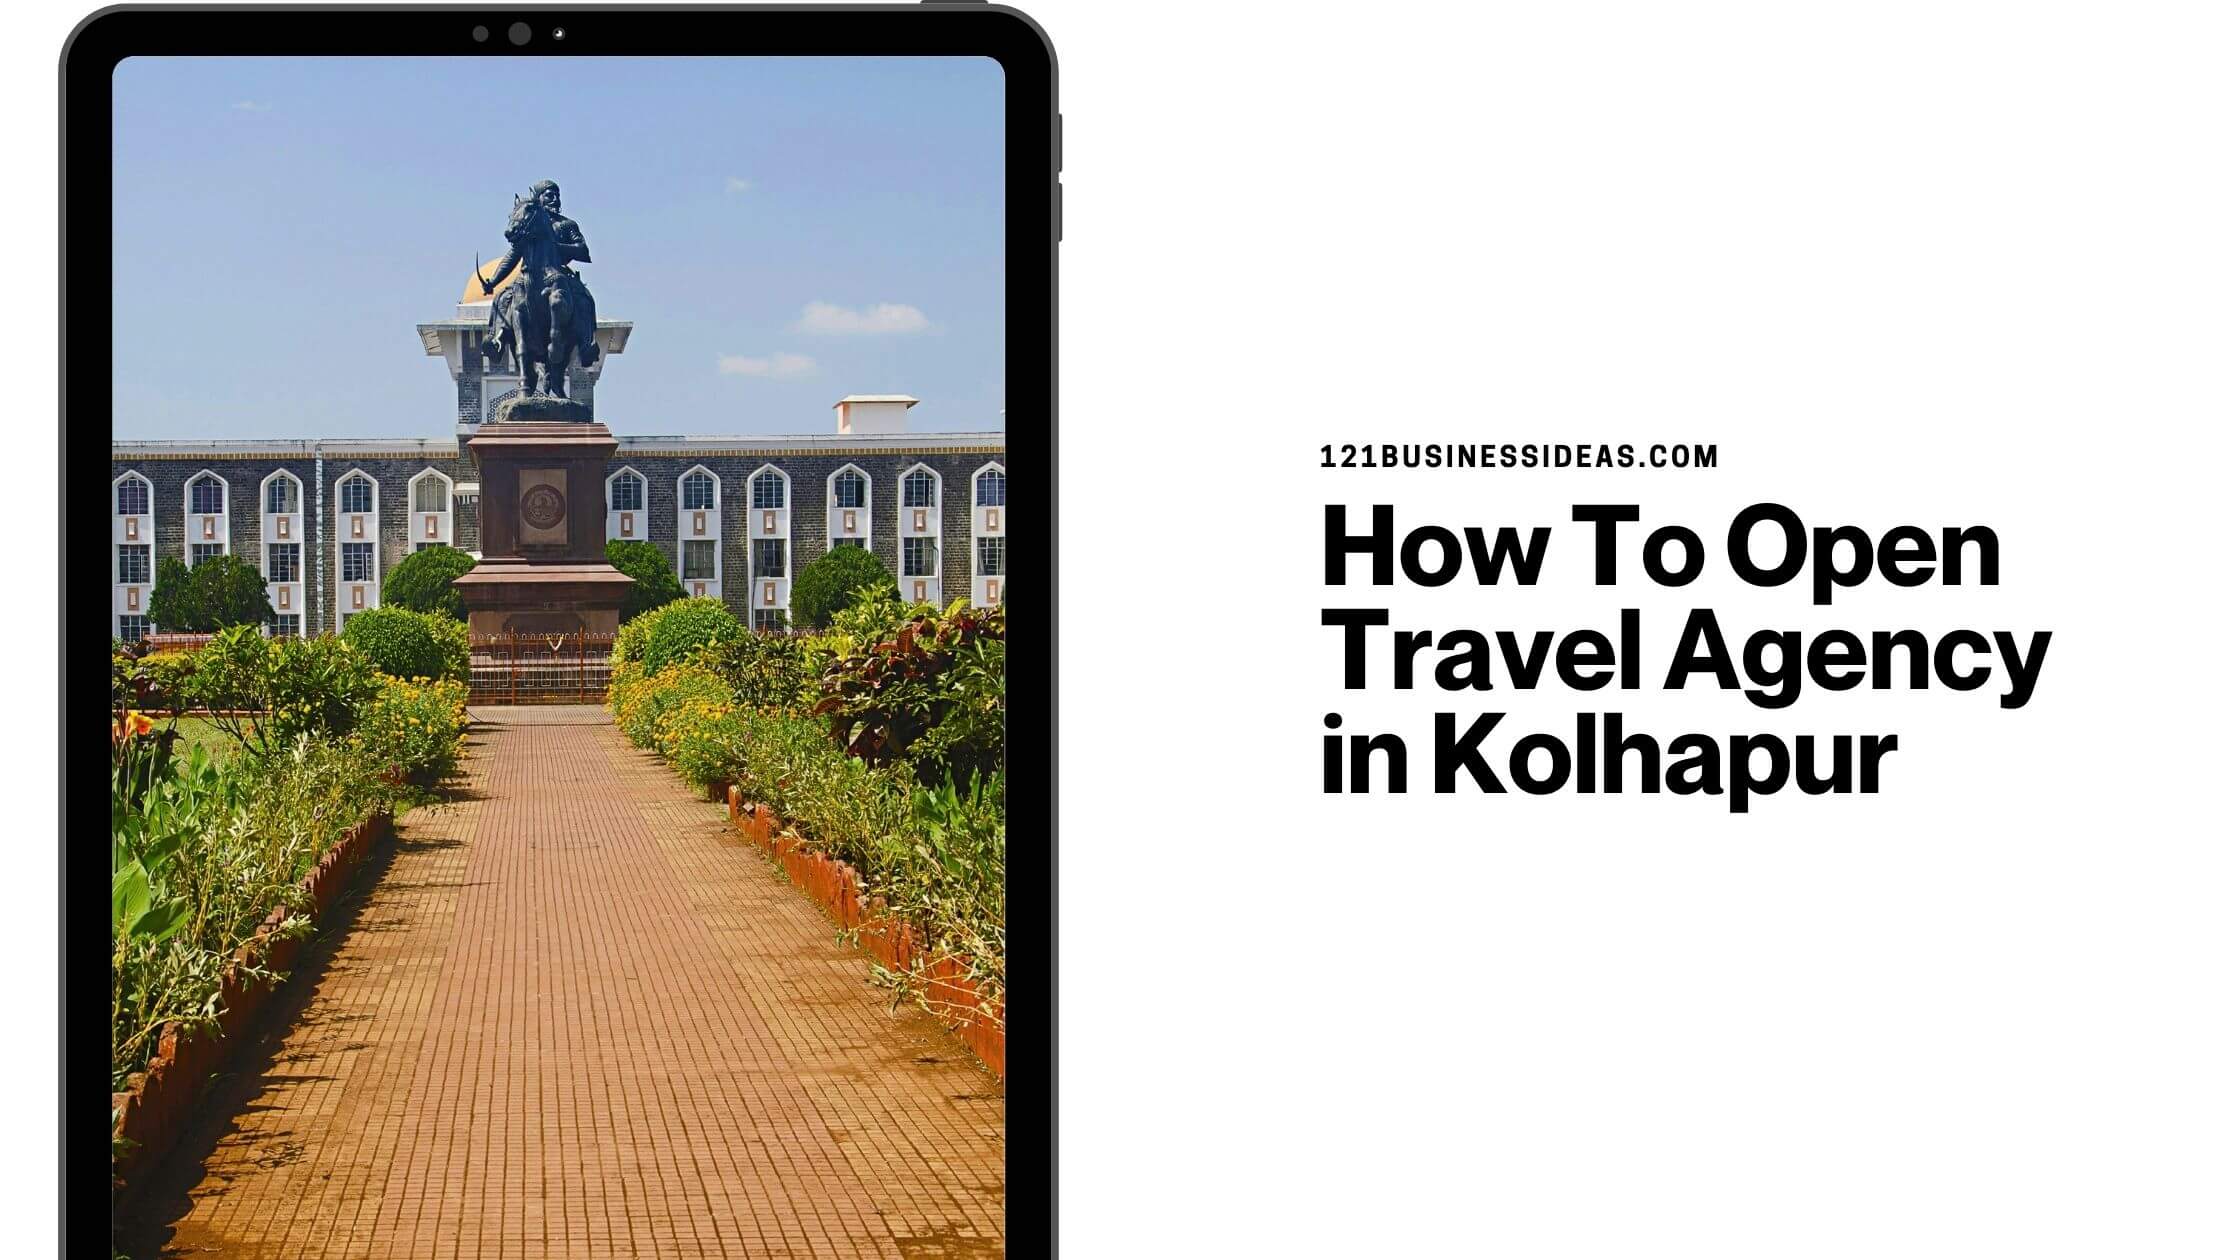 How To Open Travel Agency in Kolhapur 2